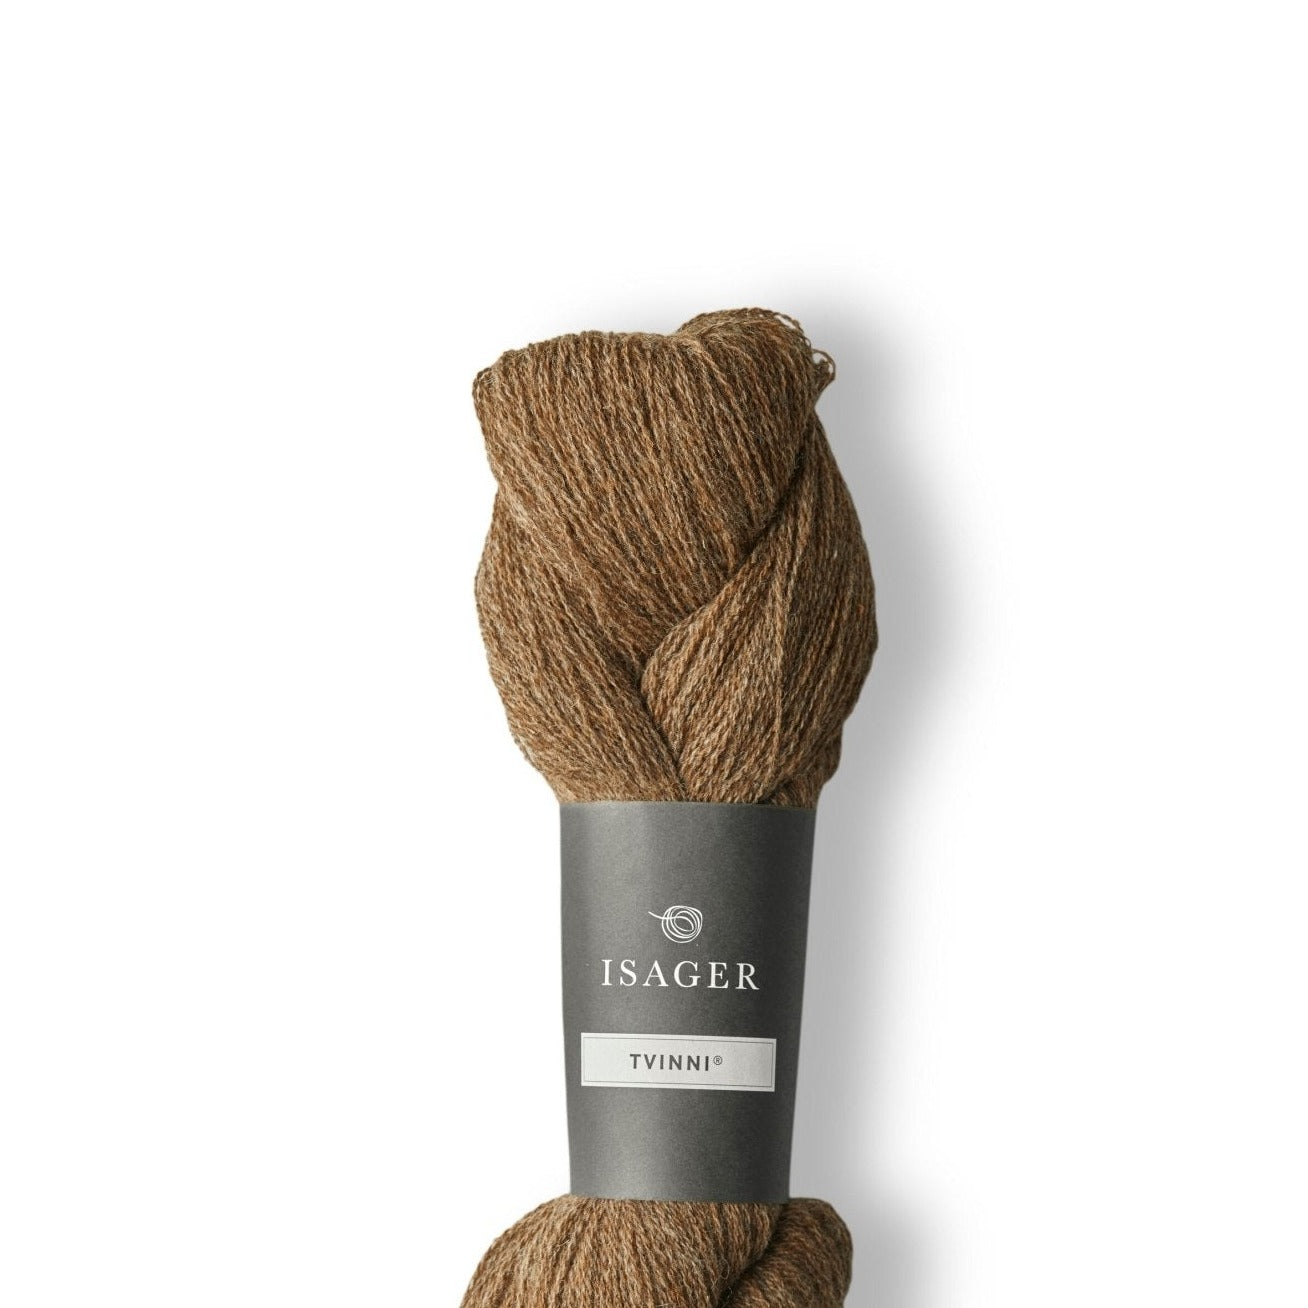 Isager Tvinni - 8s - 4 Ply - Isager - The Little Yarn Store